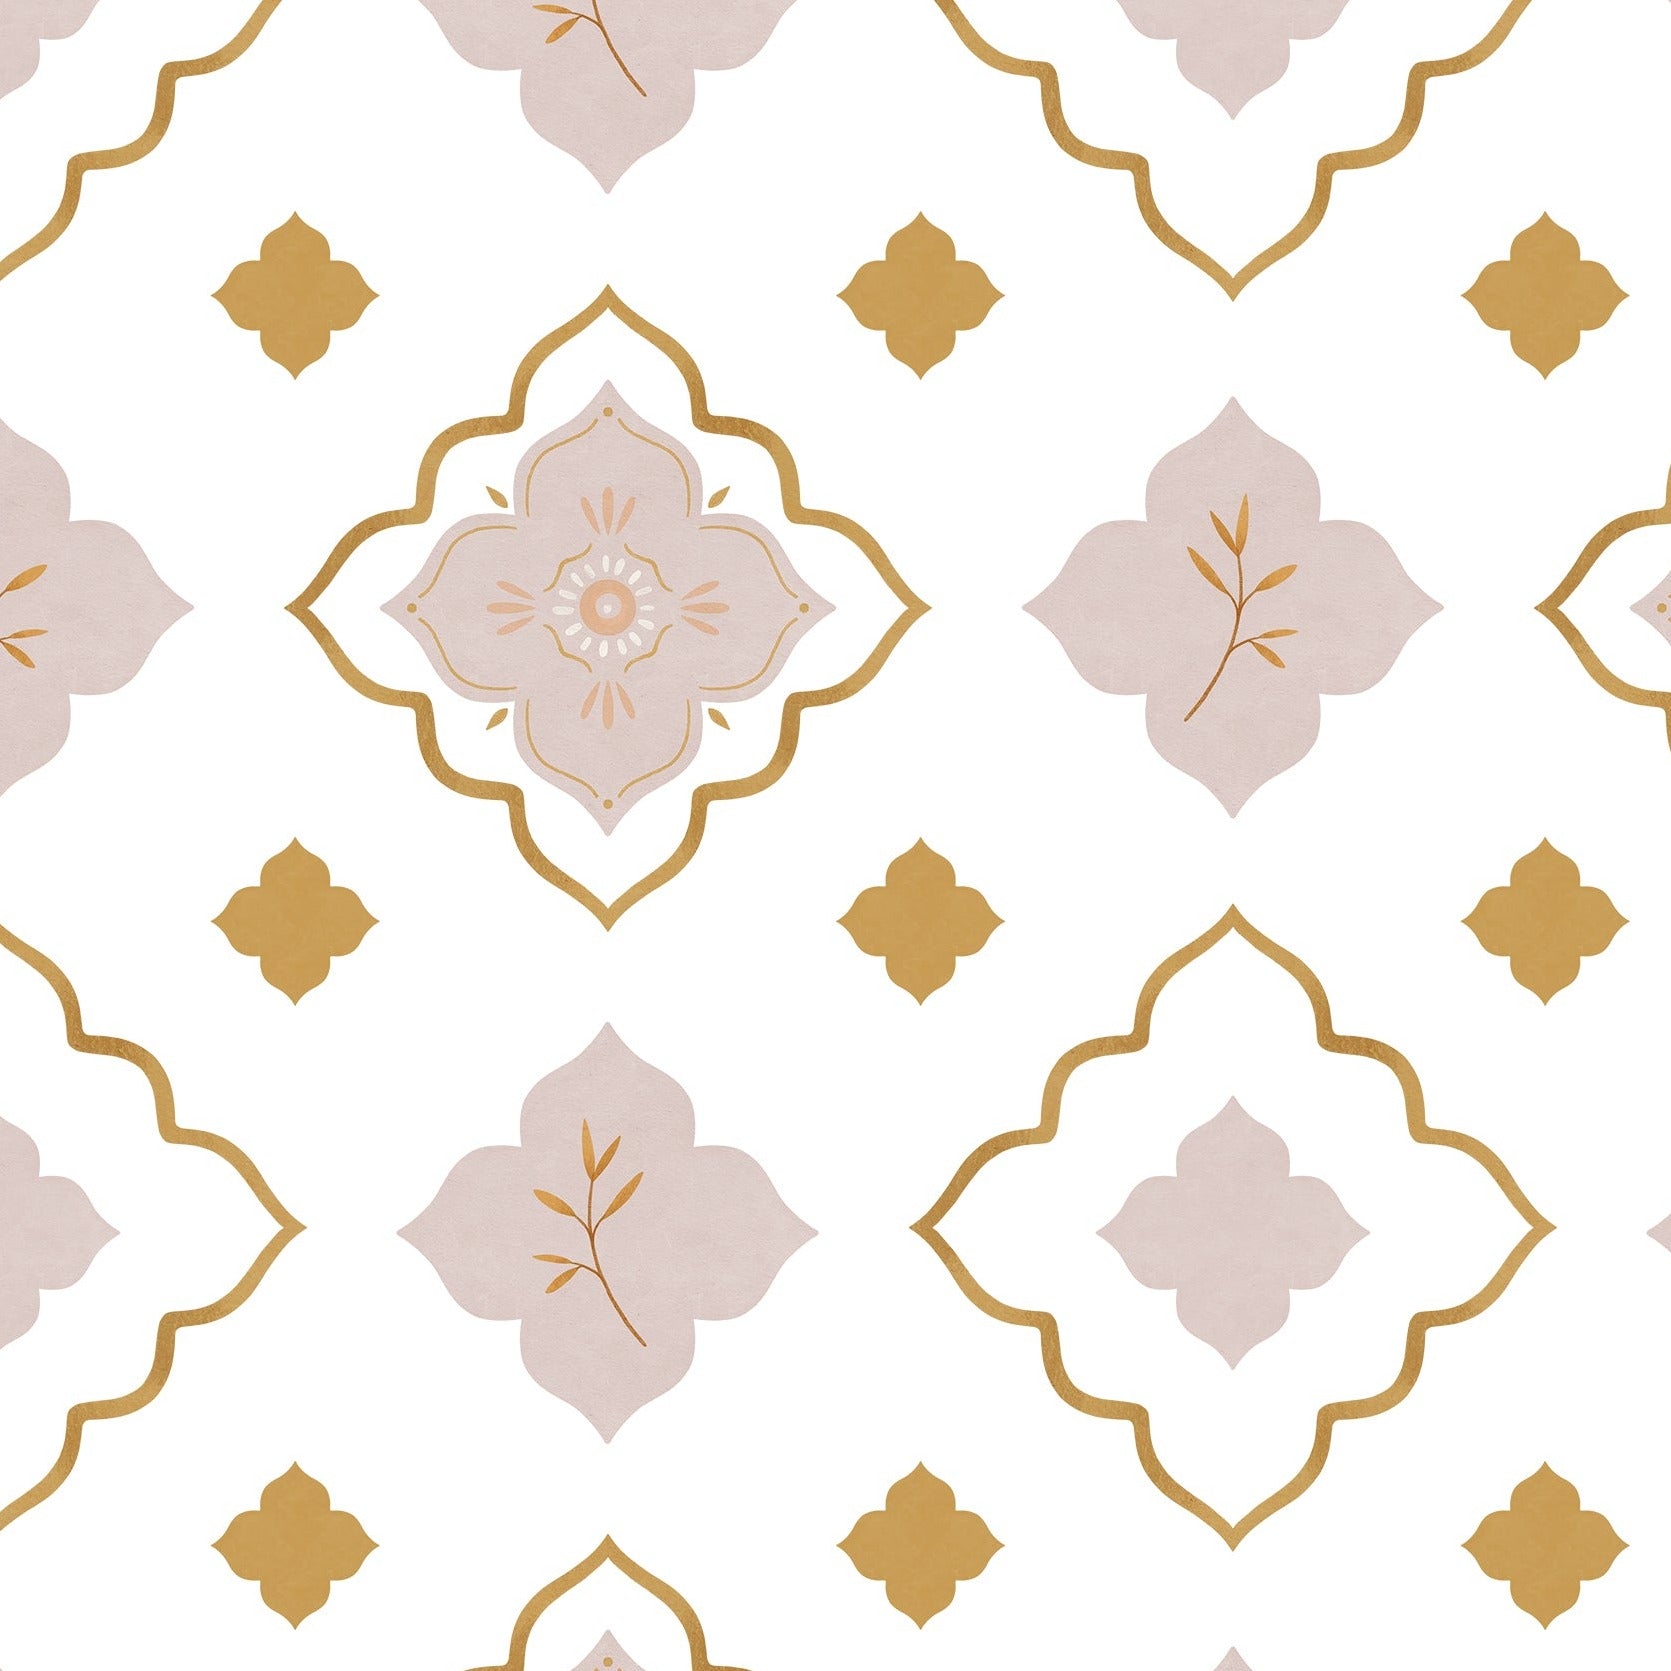 Close-up view of Moroccan Mosaic Wallpaper with an elegant design of beige, blush, and gold geometric shapes and floral motifs.